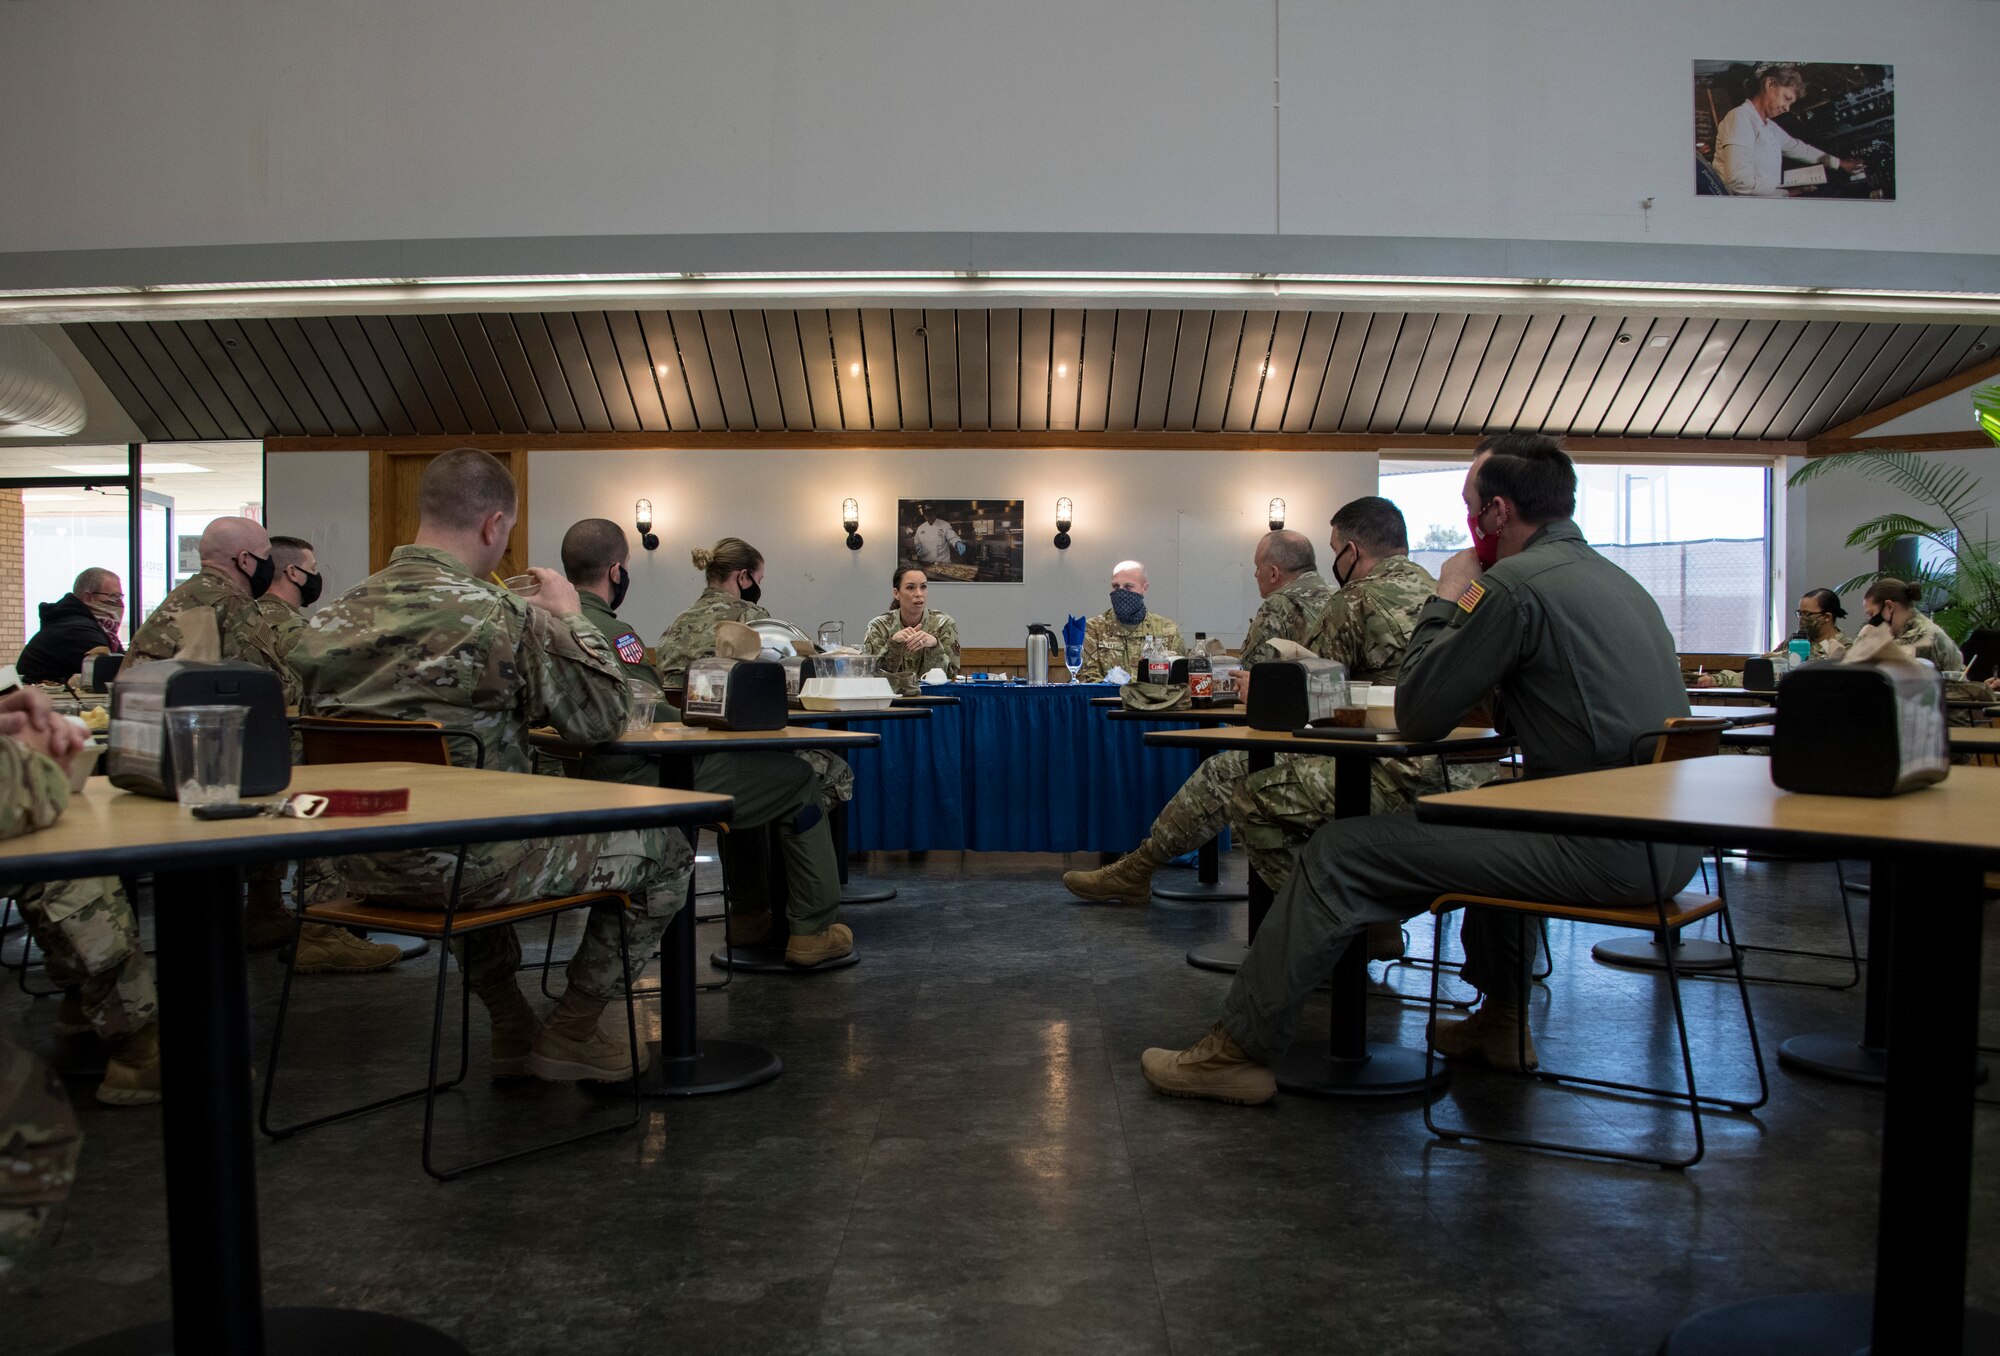 U.S. Air Force Chief Master Sgt. Kristina L. Rogers, 19th Air Force command chief, and Chief Master Sgt. Randy Kay II, 97th Air Mobility Wing command chief, engage with A Chief and Senior NCO during a mentorship lunch on March 29, 2020, in Hangar 97 at Altus Air Force Base, Oklahoma. During the lunch, Rogers spoke about “hot topics” such as the new hair regulations and fitness testing. (U.S. Air Force photo by Airman 1st Class Amanda Lovelace)